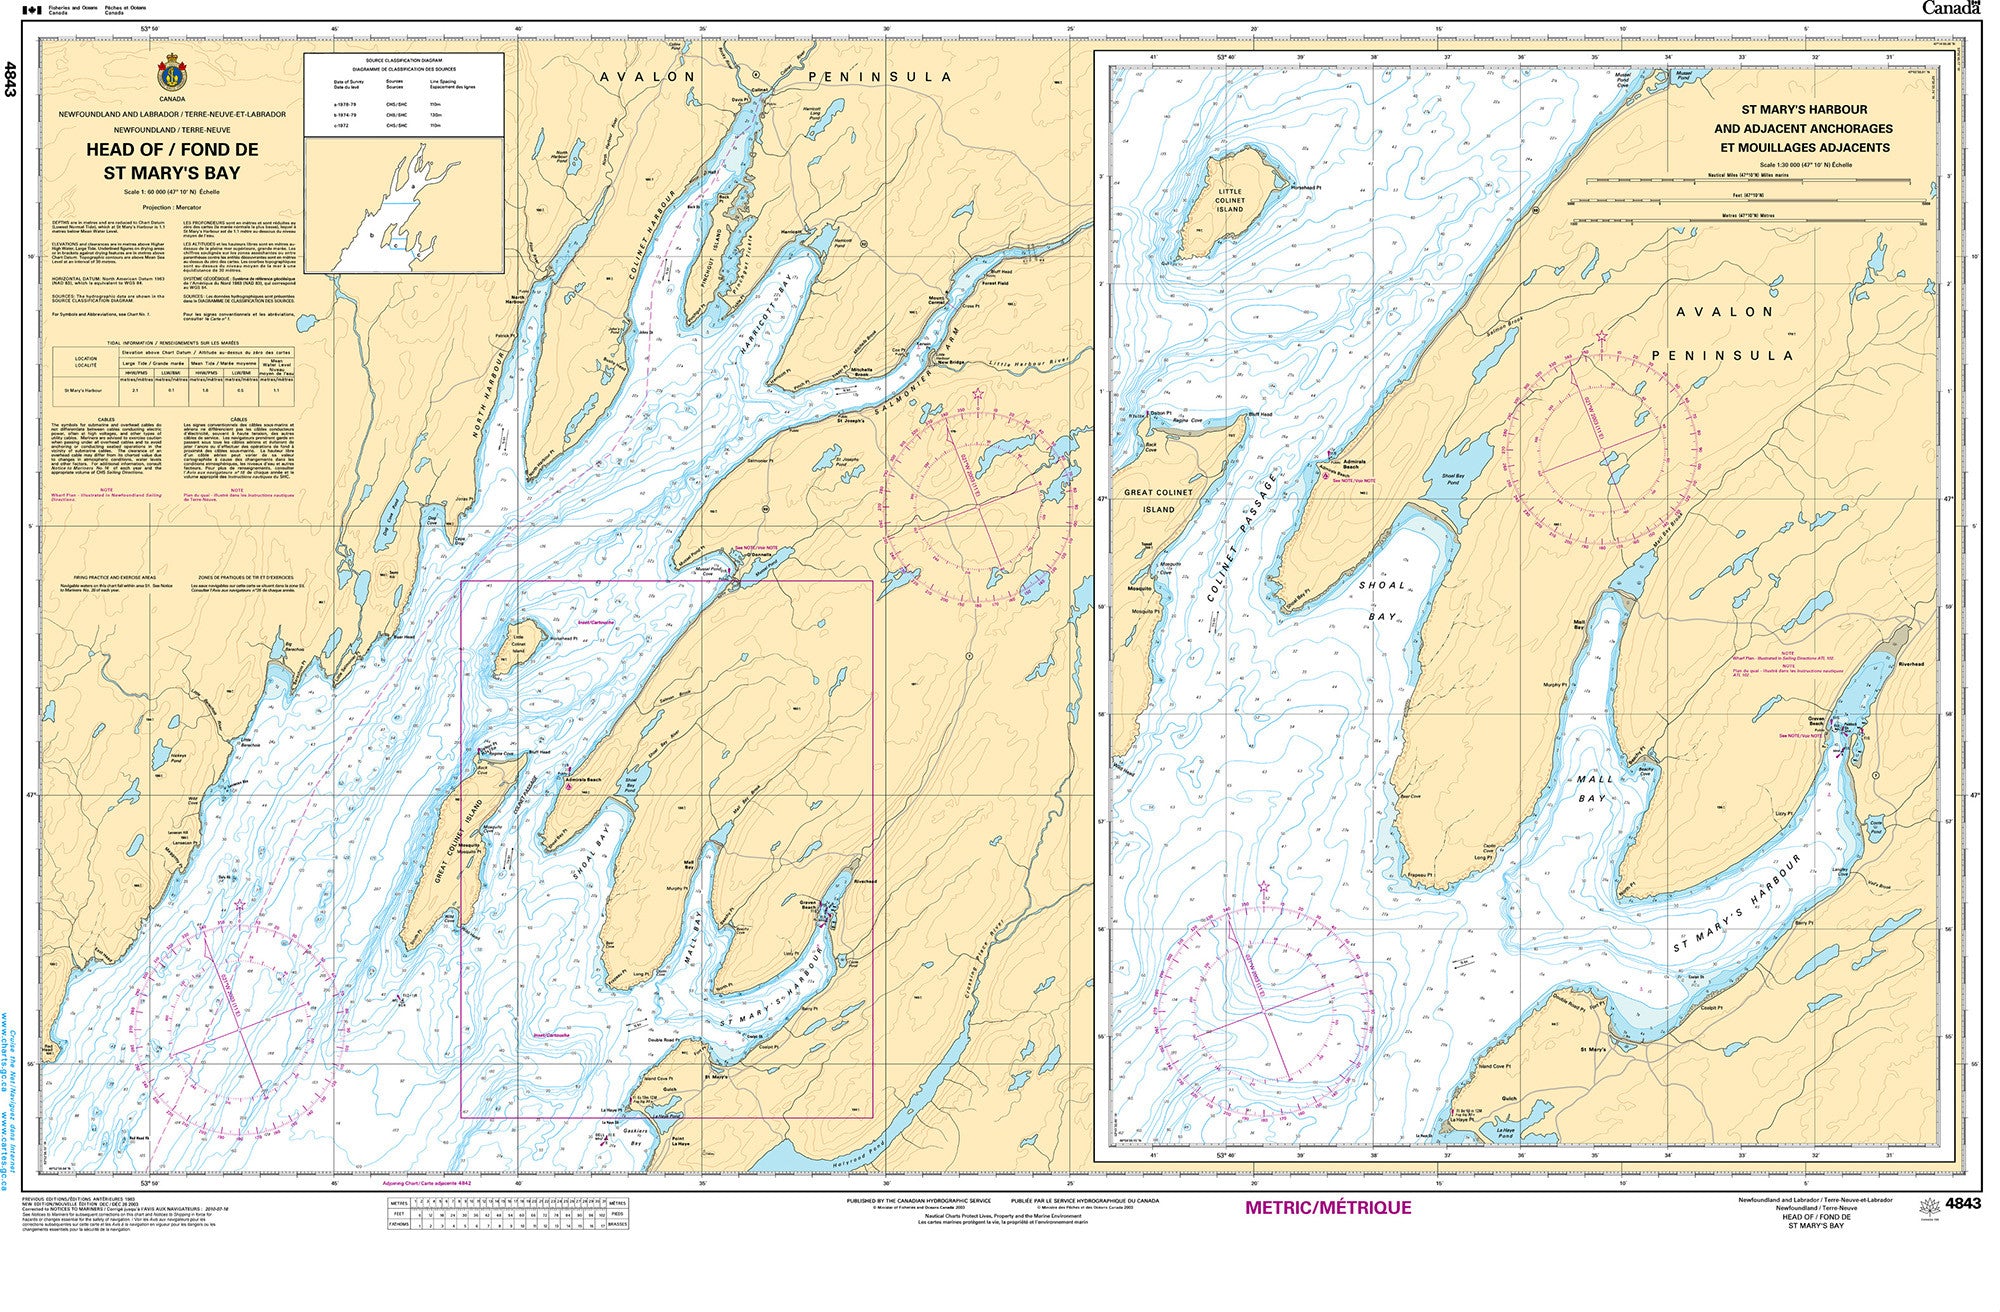 Canadian Hydrographic Service Nautical Chart CHS4843: Head of / Fond de St Mary's Bay